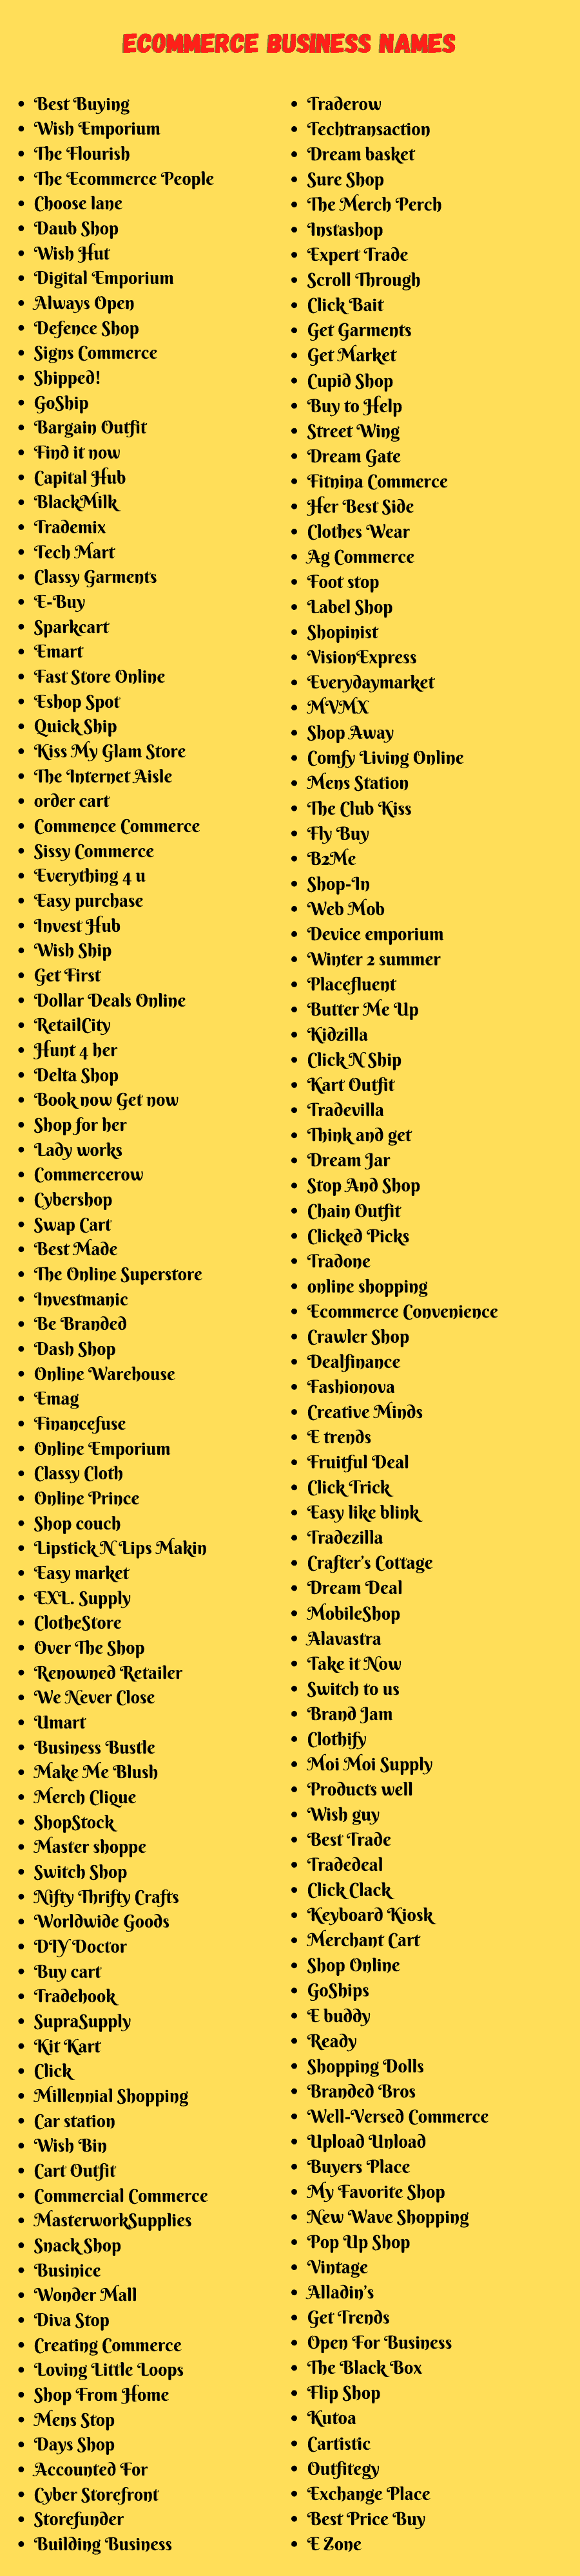 Ecommerce Business Names